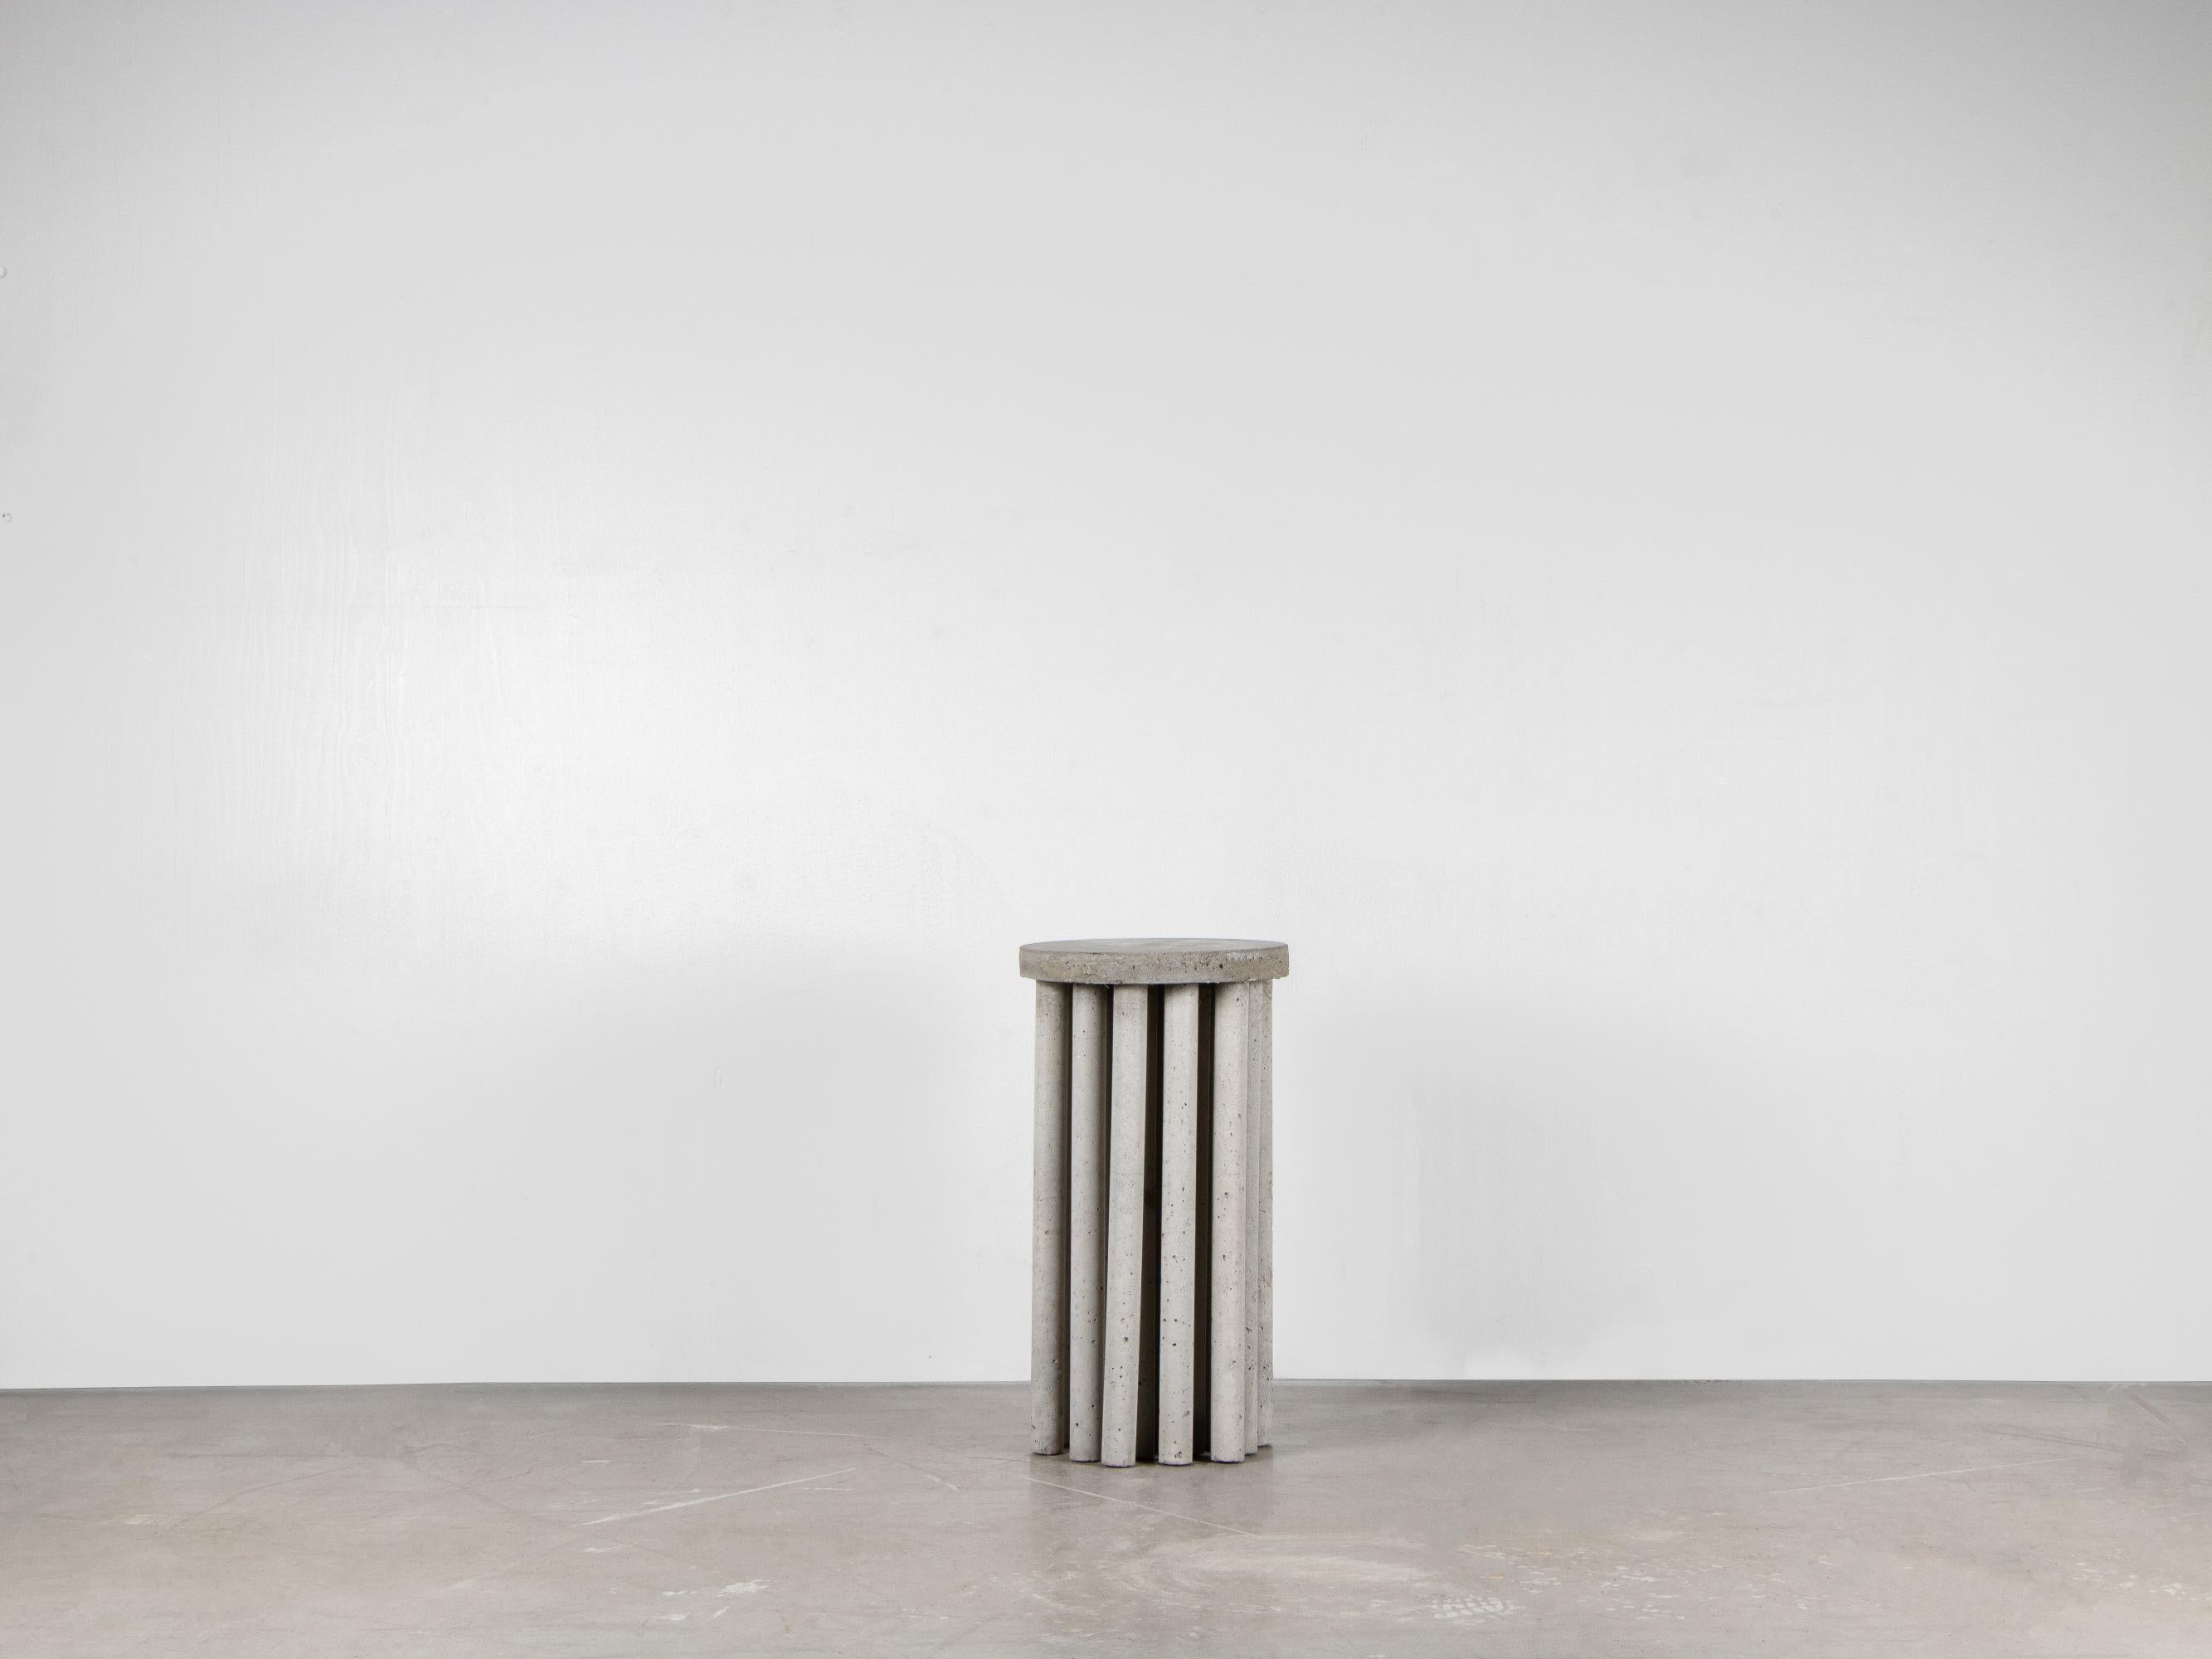 PÅLE Sculpted side table by Lucas Morten
2018
Limited edition of 23
Dimensions: Ø 30, H 56 cm
Material: Sculpted in raw concrete

With elements fetched by the architectural era brutalism combined with a figurative memory of a group of bare-legged